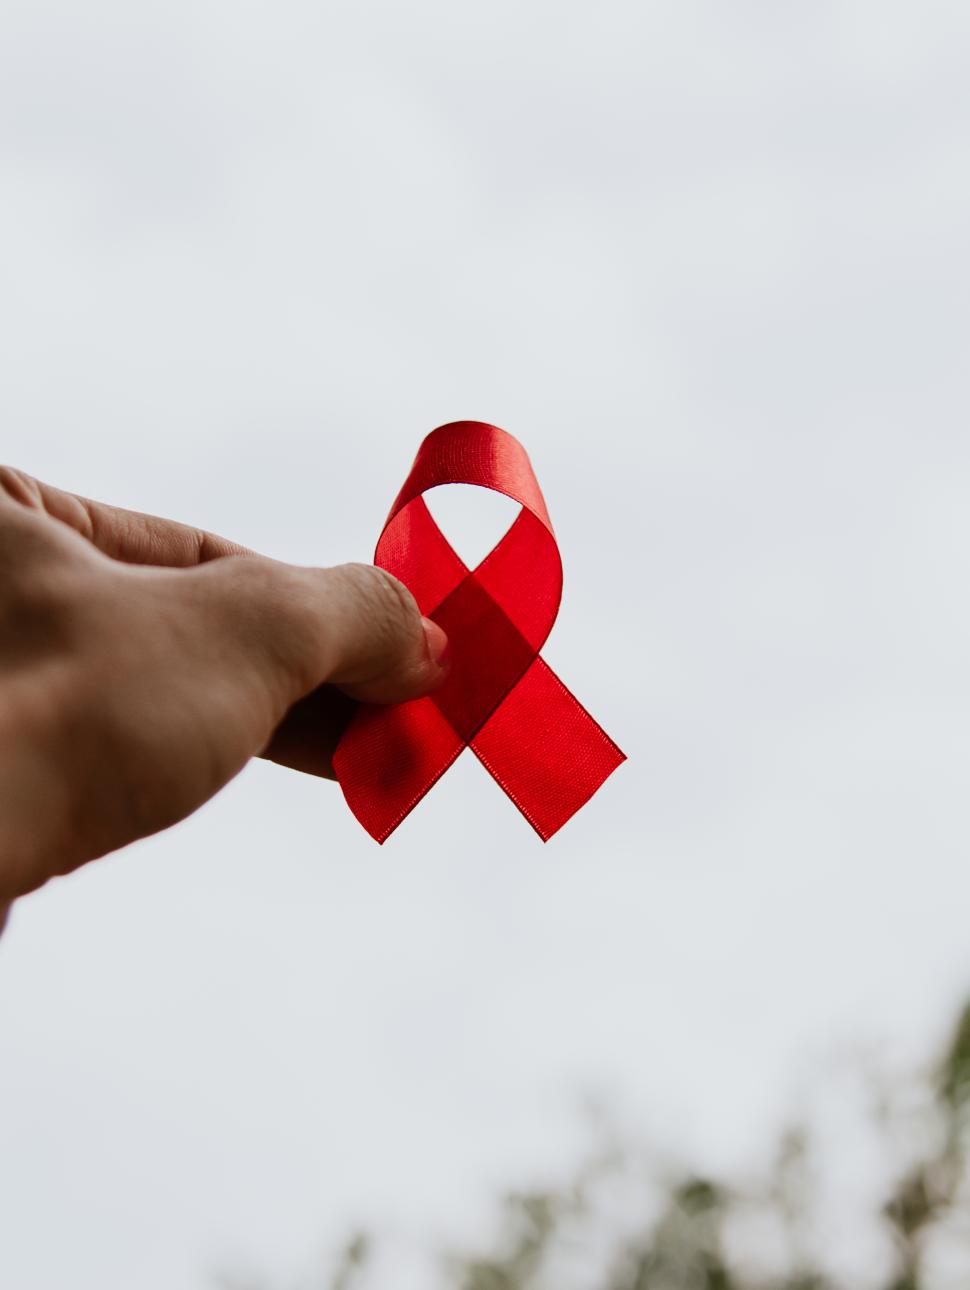 A hand holds a red ribbon folded over itself up against a bright sky. The red ribbon is symbolic for the World Aids Day awareness campaign.